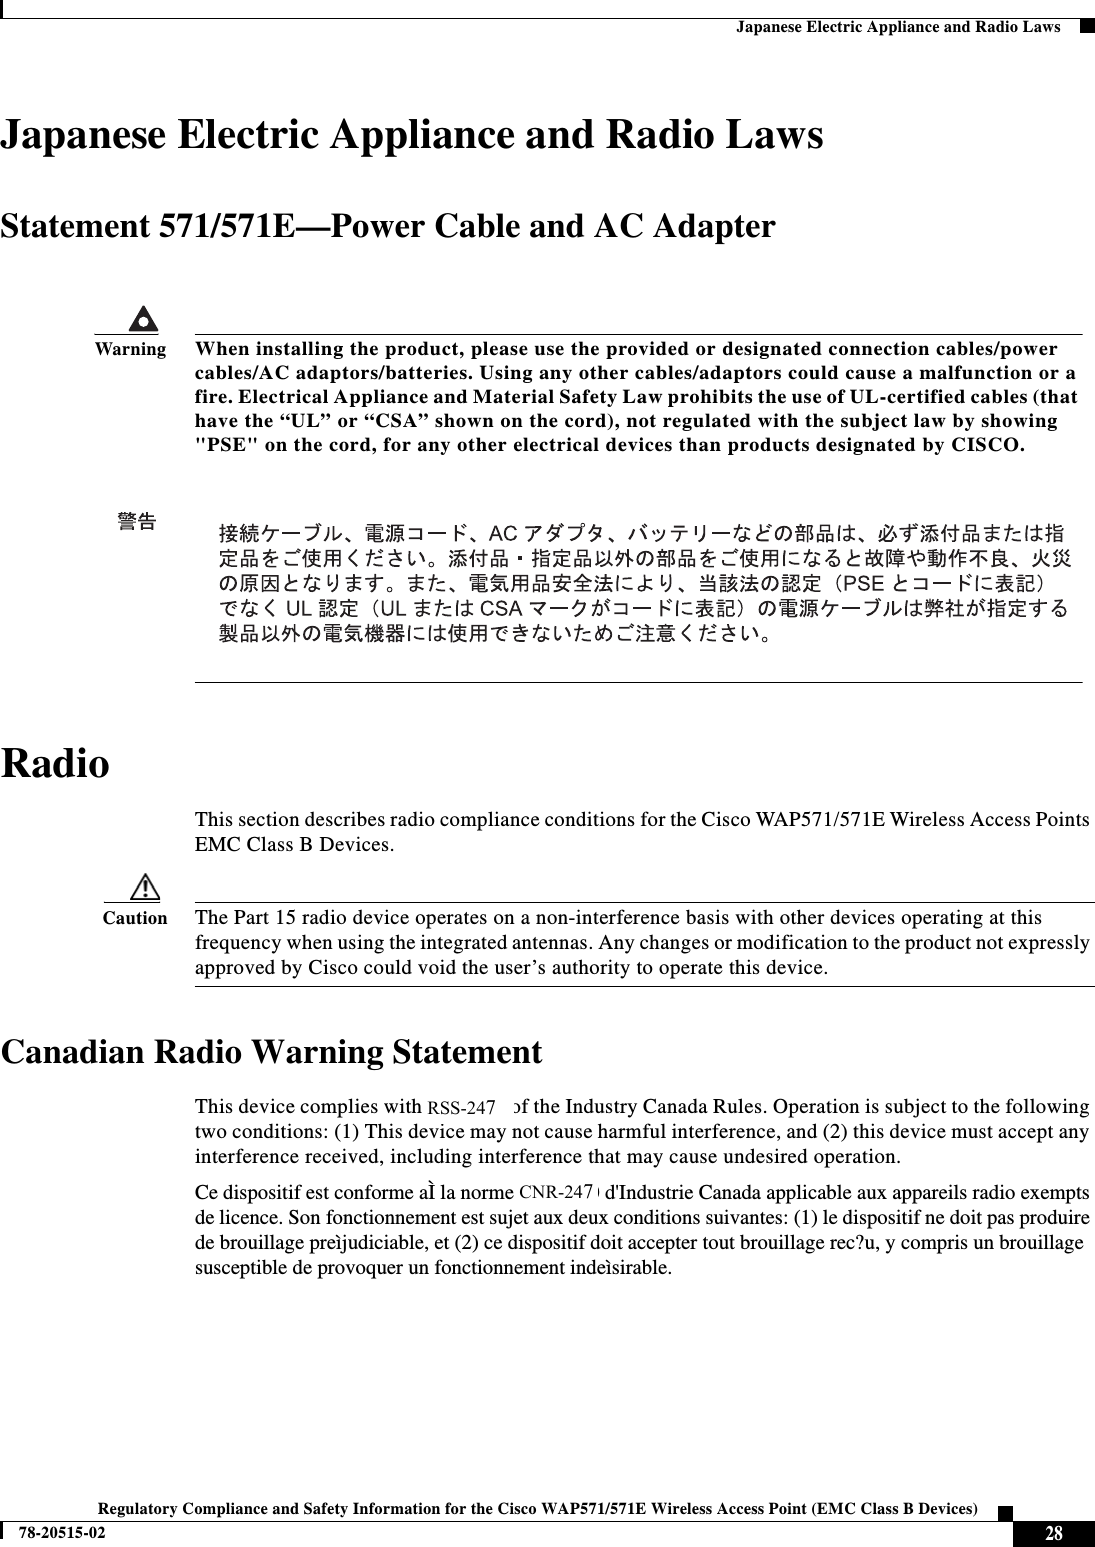  27Regulatory Compliance and Safety Information for the Cisco WAP571/571E Wireless Access Point (EMC Class B Devices)78-20515-02  EMC Class B Notices and WarningsClass B Notice for CanadaThis Class B digital apparatus complies with Canadian ICES-003.Cet appareil numérique de la classe B est conforme à la norme NMB-003 du Canada.Statement 295—Class B Warning for KoreaStatement 157—VCCI Compliance for Class B EquipmentWarningThis is a Class B Device and is registered for EMC requirements for residential use. This device can be used not only in residential areas but in all other areas.WarningThis is a Class B product based on the standard of the VCCI Council. If this is used near a radio or television receiver in a domestic environment, it may cause radio Interference. Install and use the equipment according to the instruction manual. VCCI-B